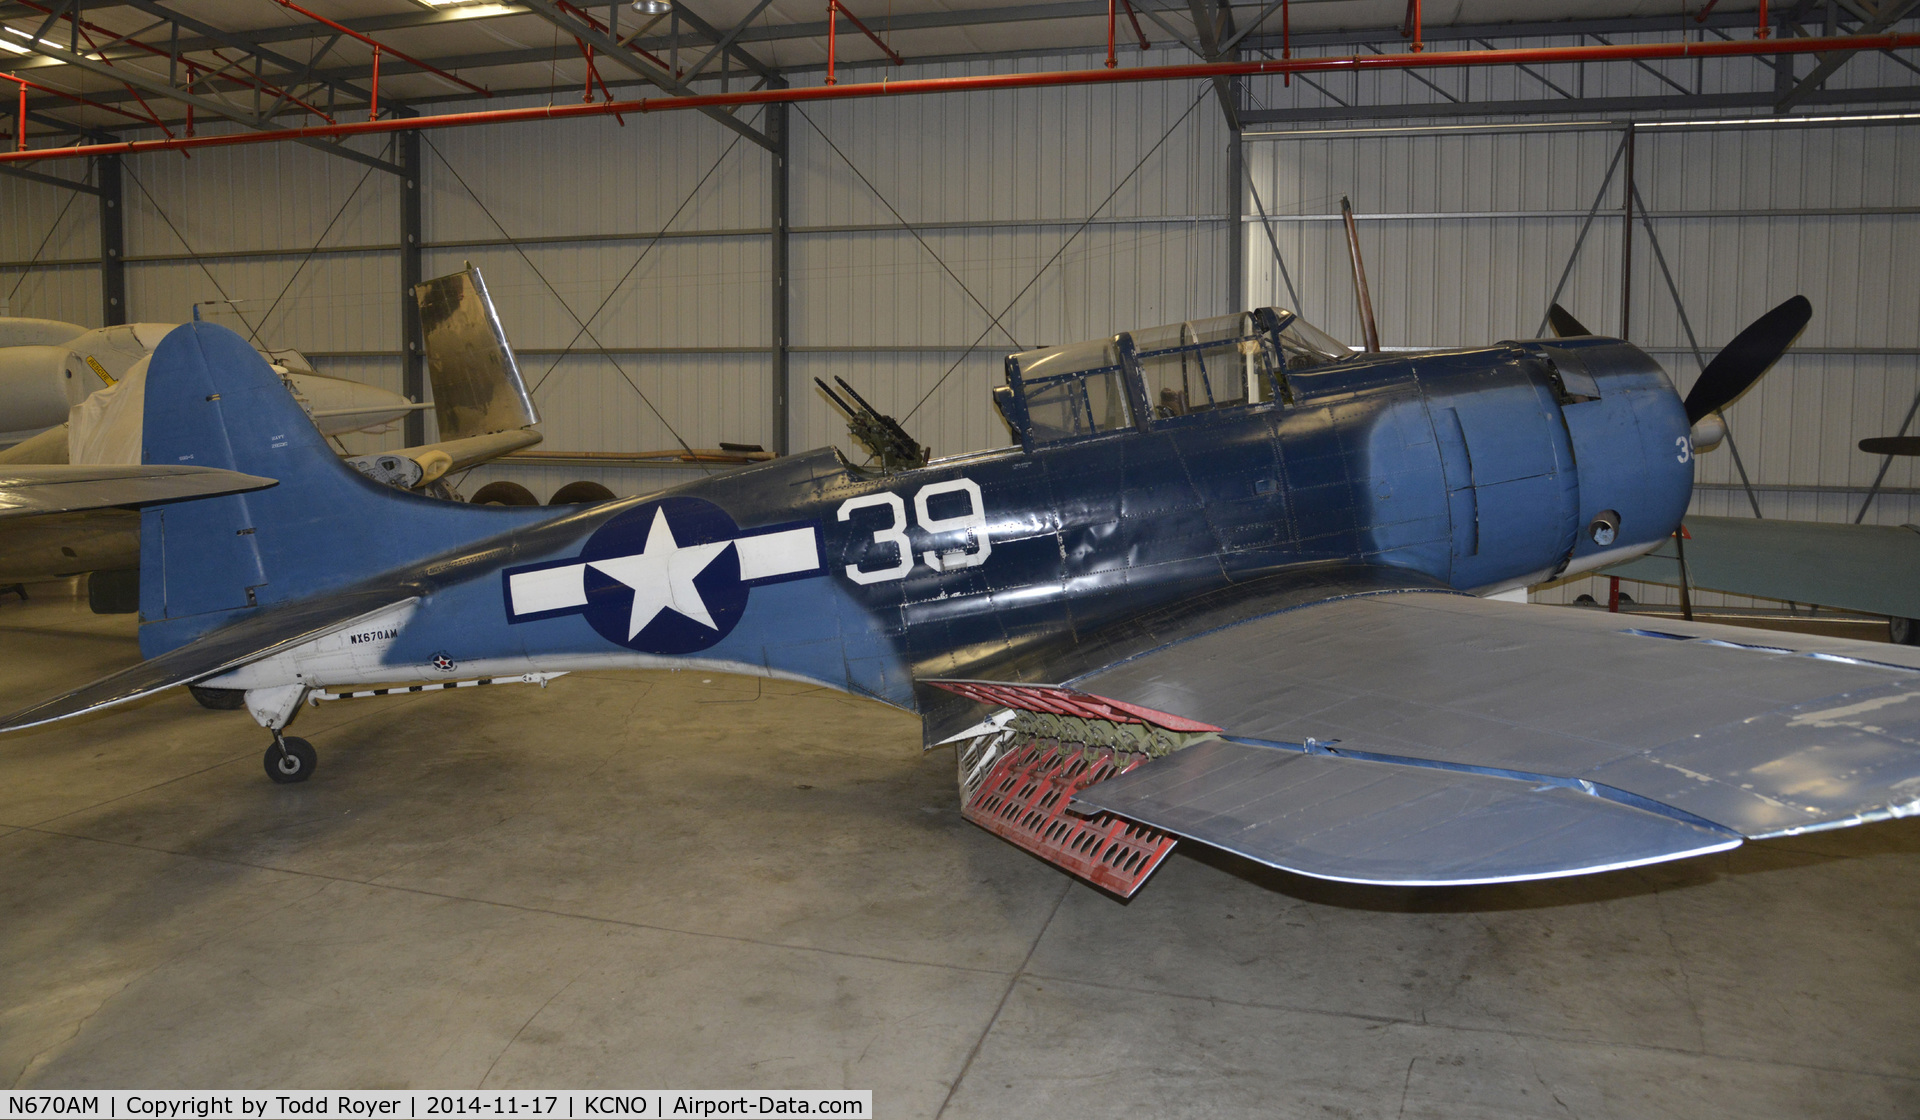 N670AM, 1993 Douglas SBD-5 Dauntless C/N 28536, On display at the Planes of Fame Chino location